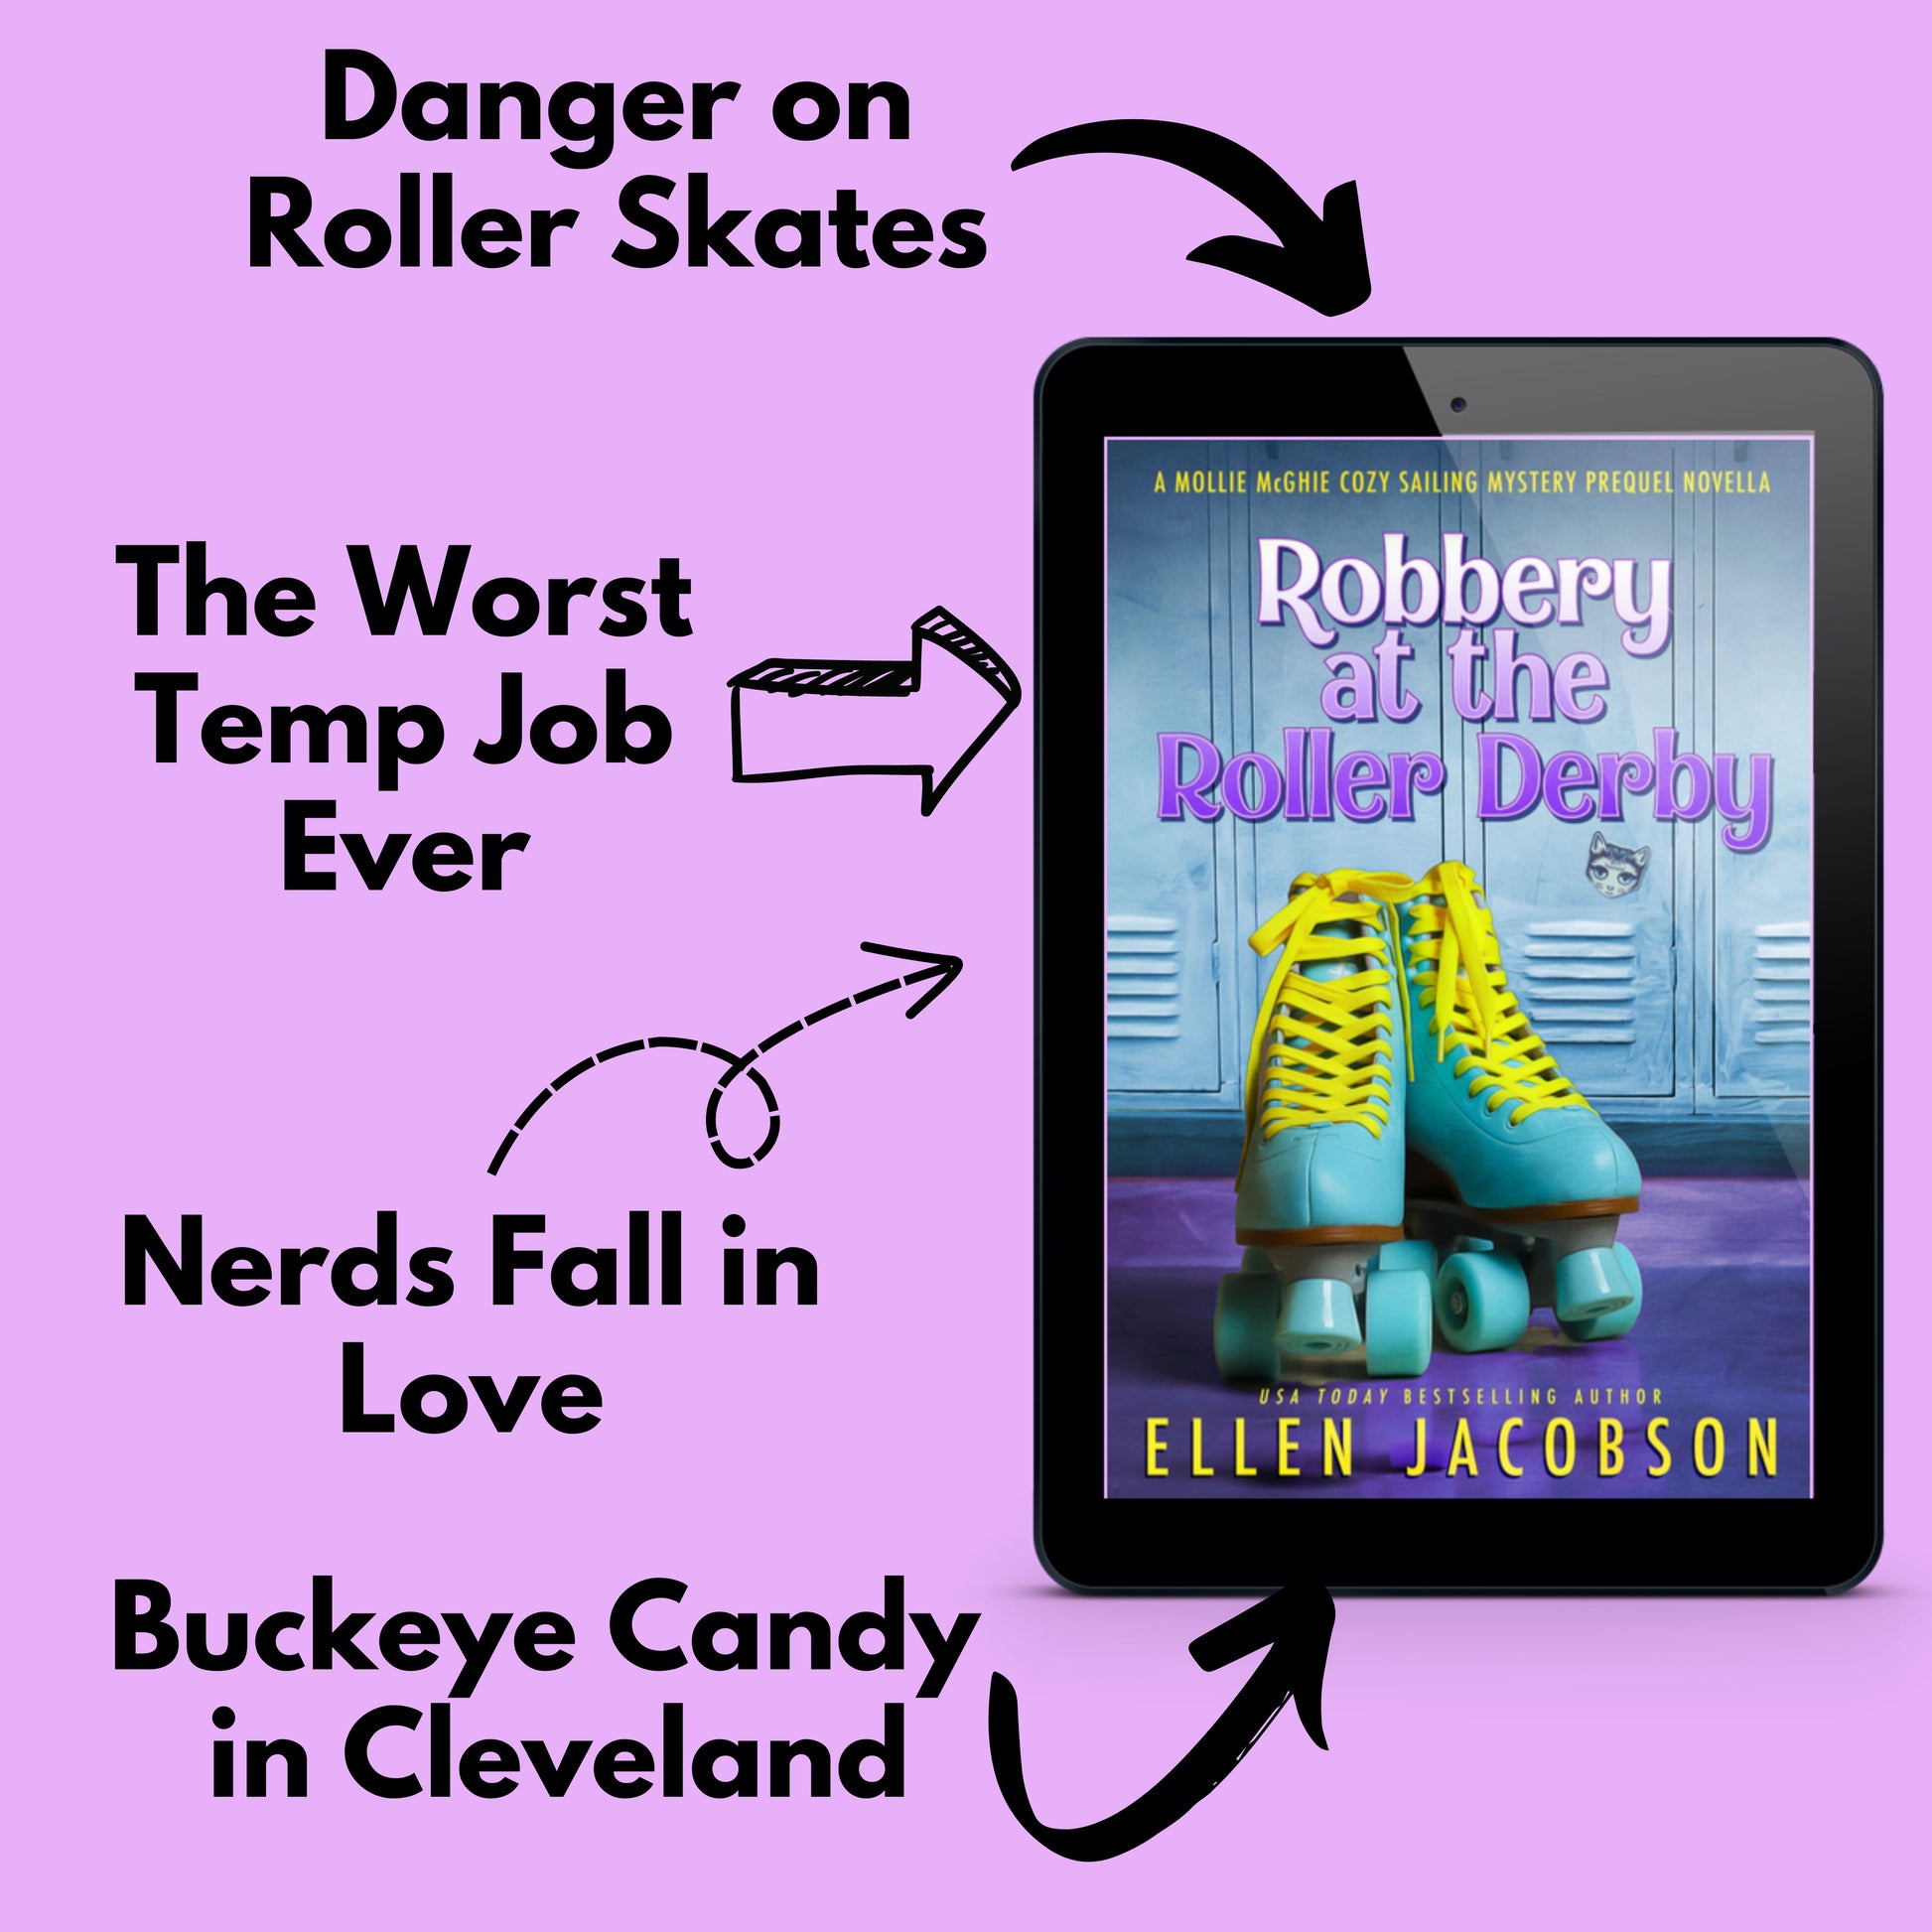 Image: Robbery at the Roller Derby cozy mystery novella ebook by Ellen Jacobson